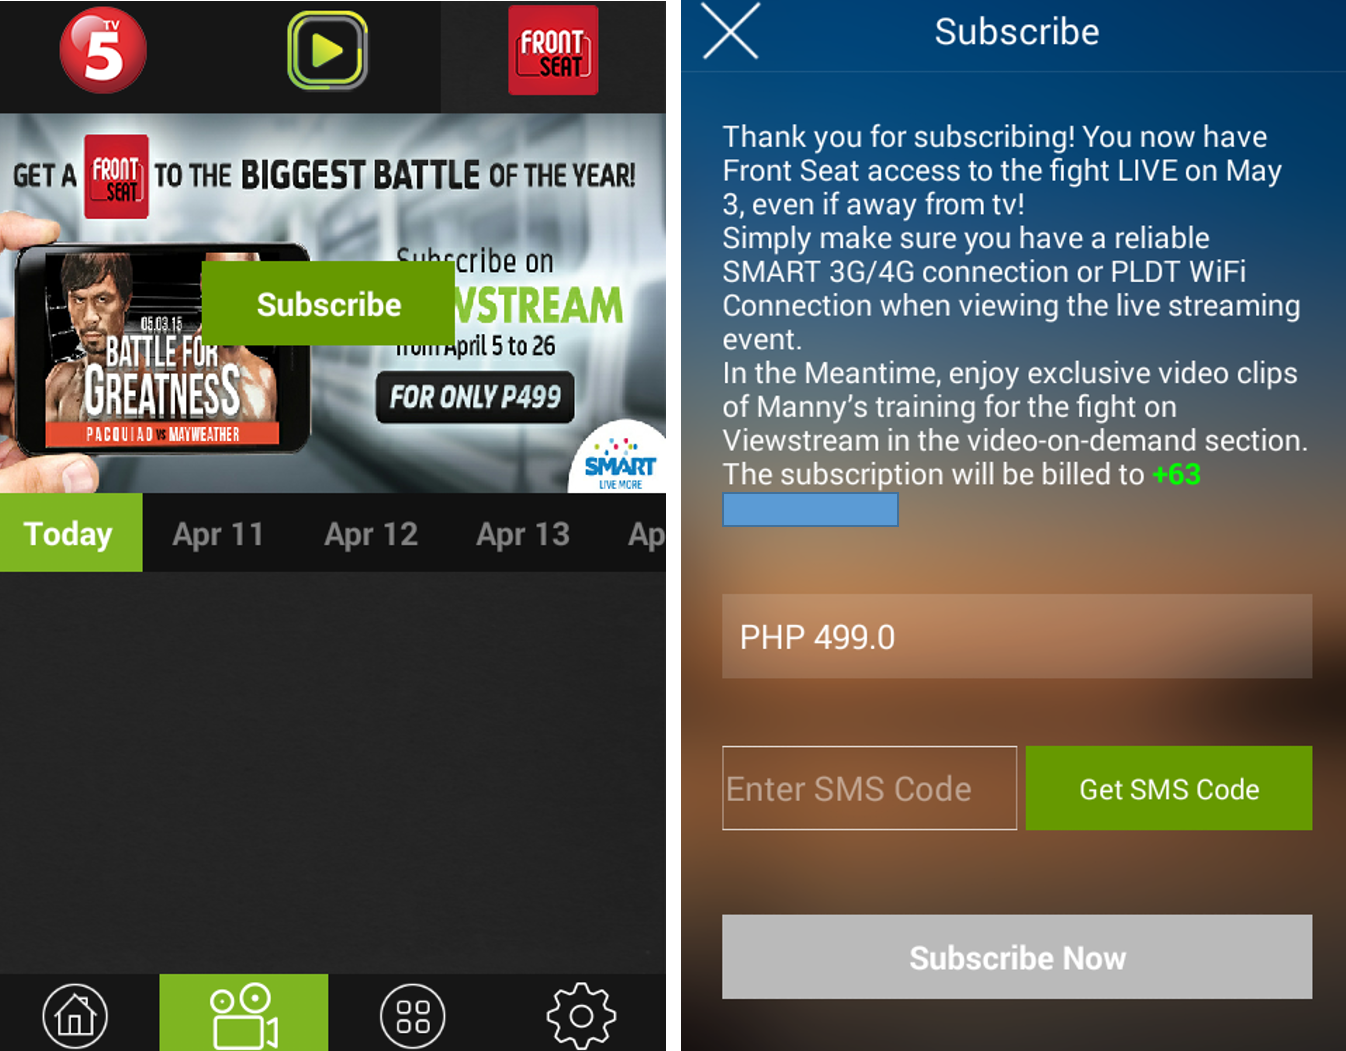 Pacquiao-Mayweather fight Live on your smartphone via Viewstream